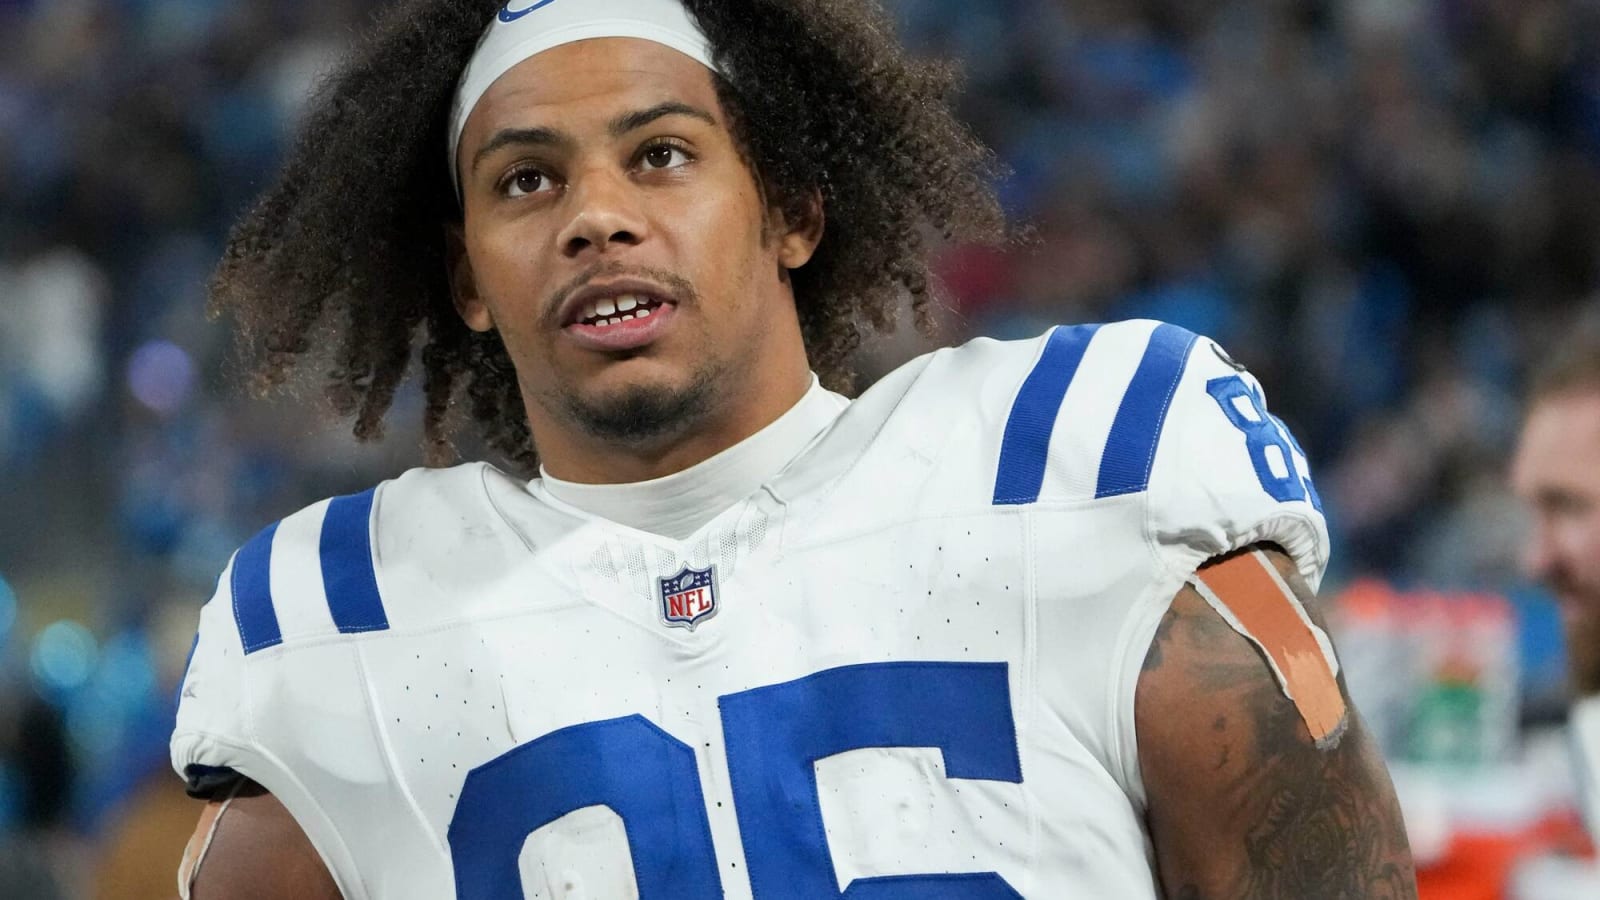  Indianapolis Colts Offensive Weapon Arrested On Alleged Battery Charge 